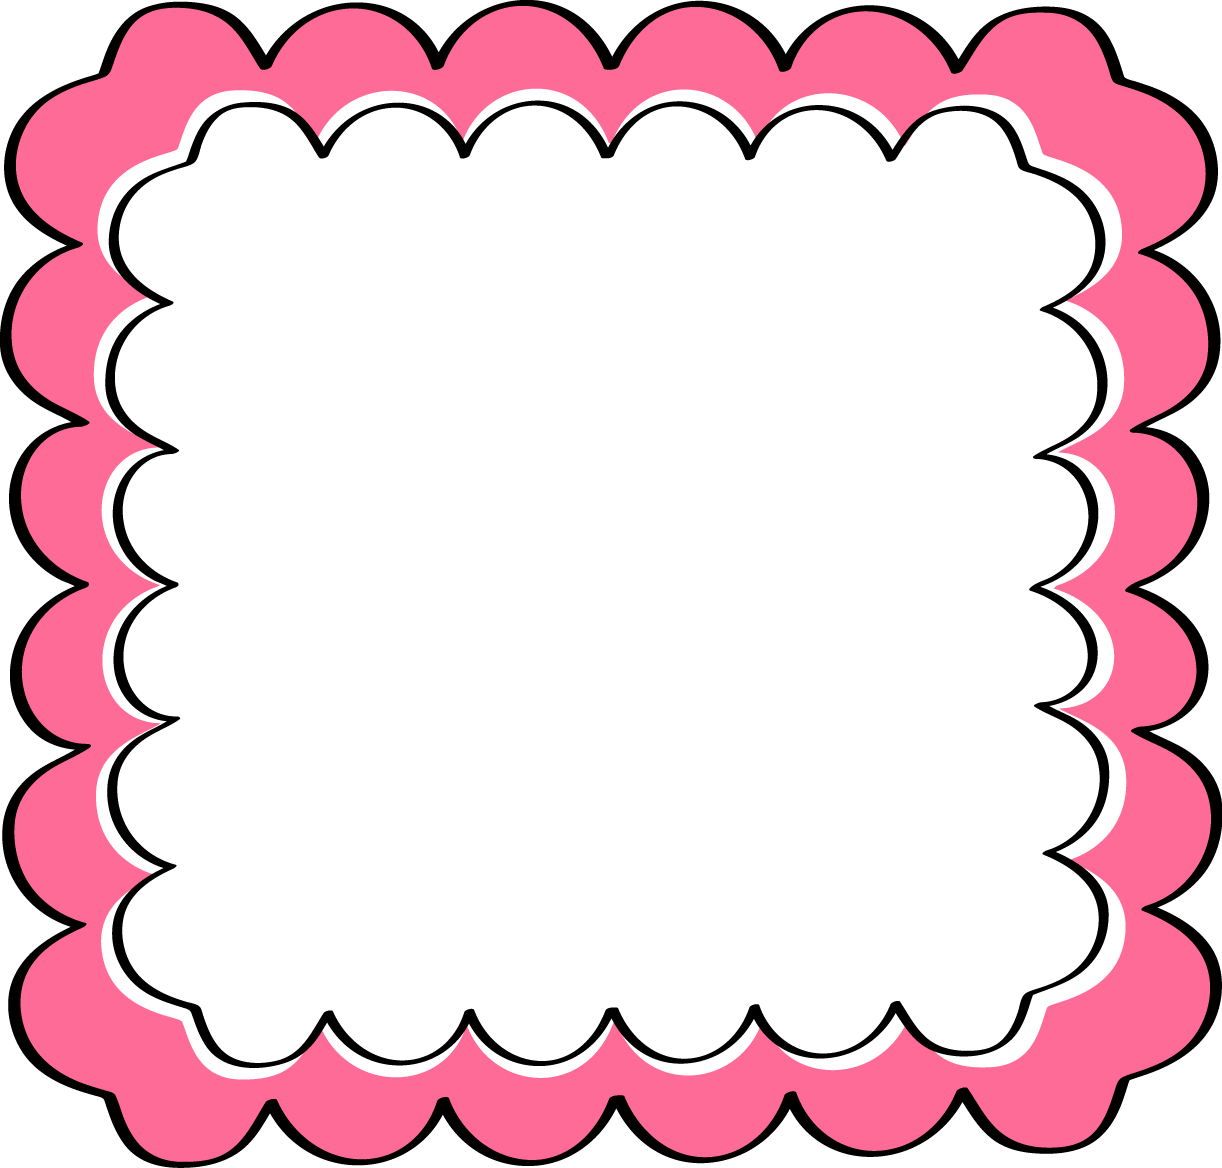 Pink Scroll Frame Clip Art | Clipart Panda - Free Clipart Images